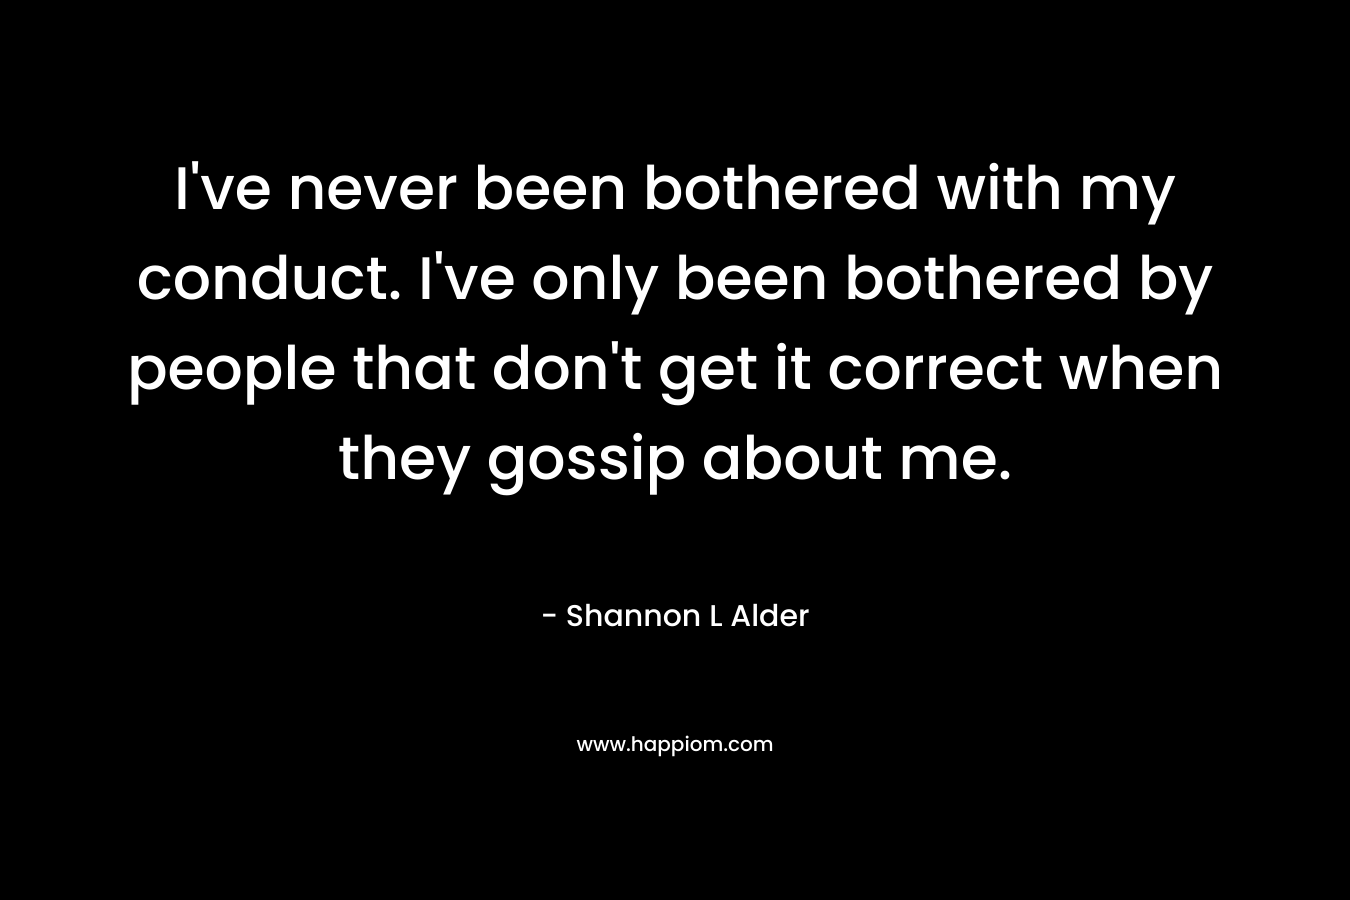 I’ve never been bothered with my conduct. I’ve only been bothered by people that don’t get it correct when they gossip about me. – Shannon L Alder